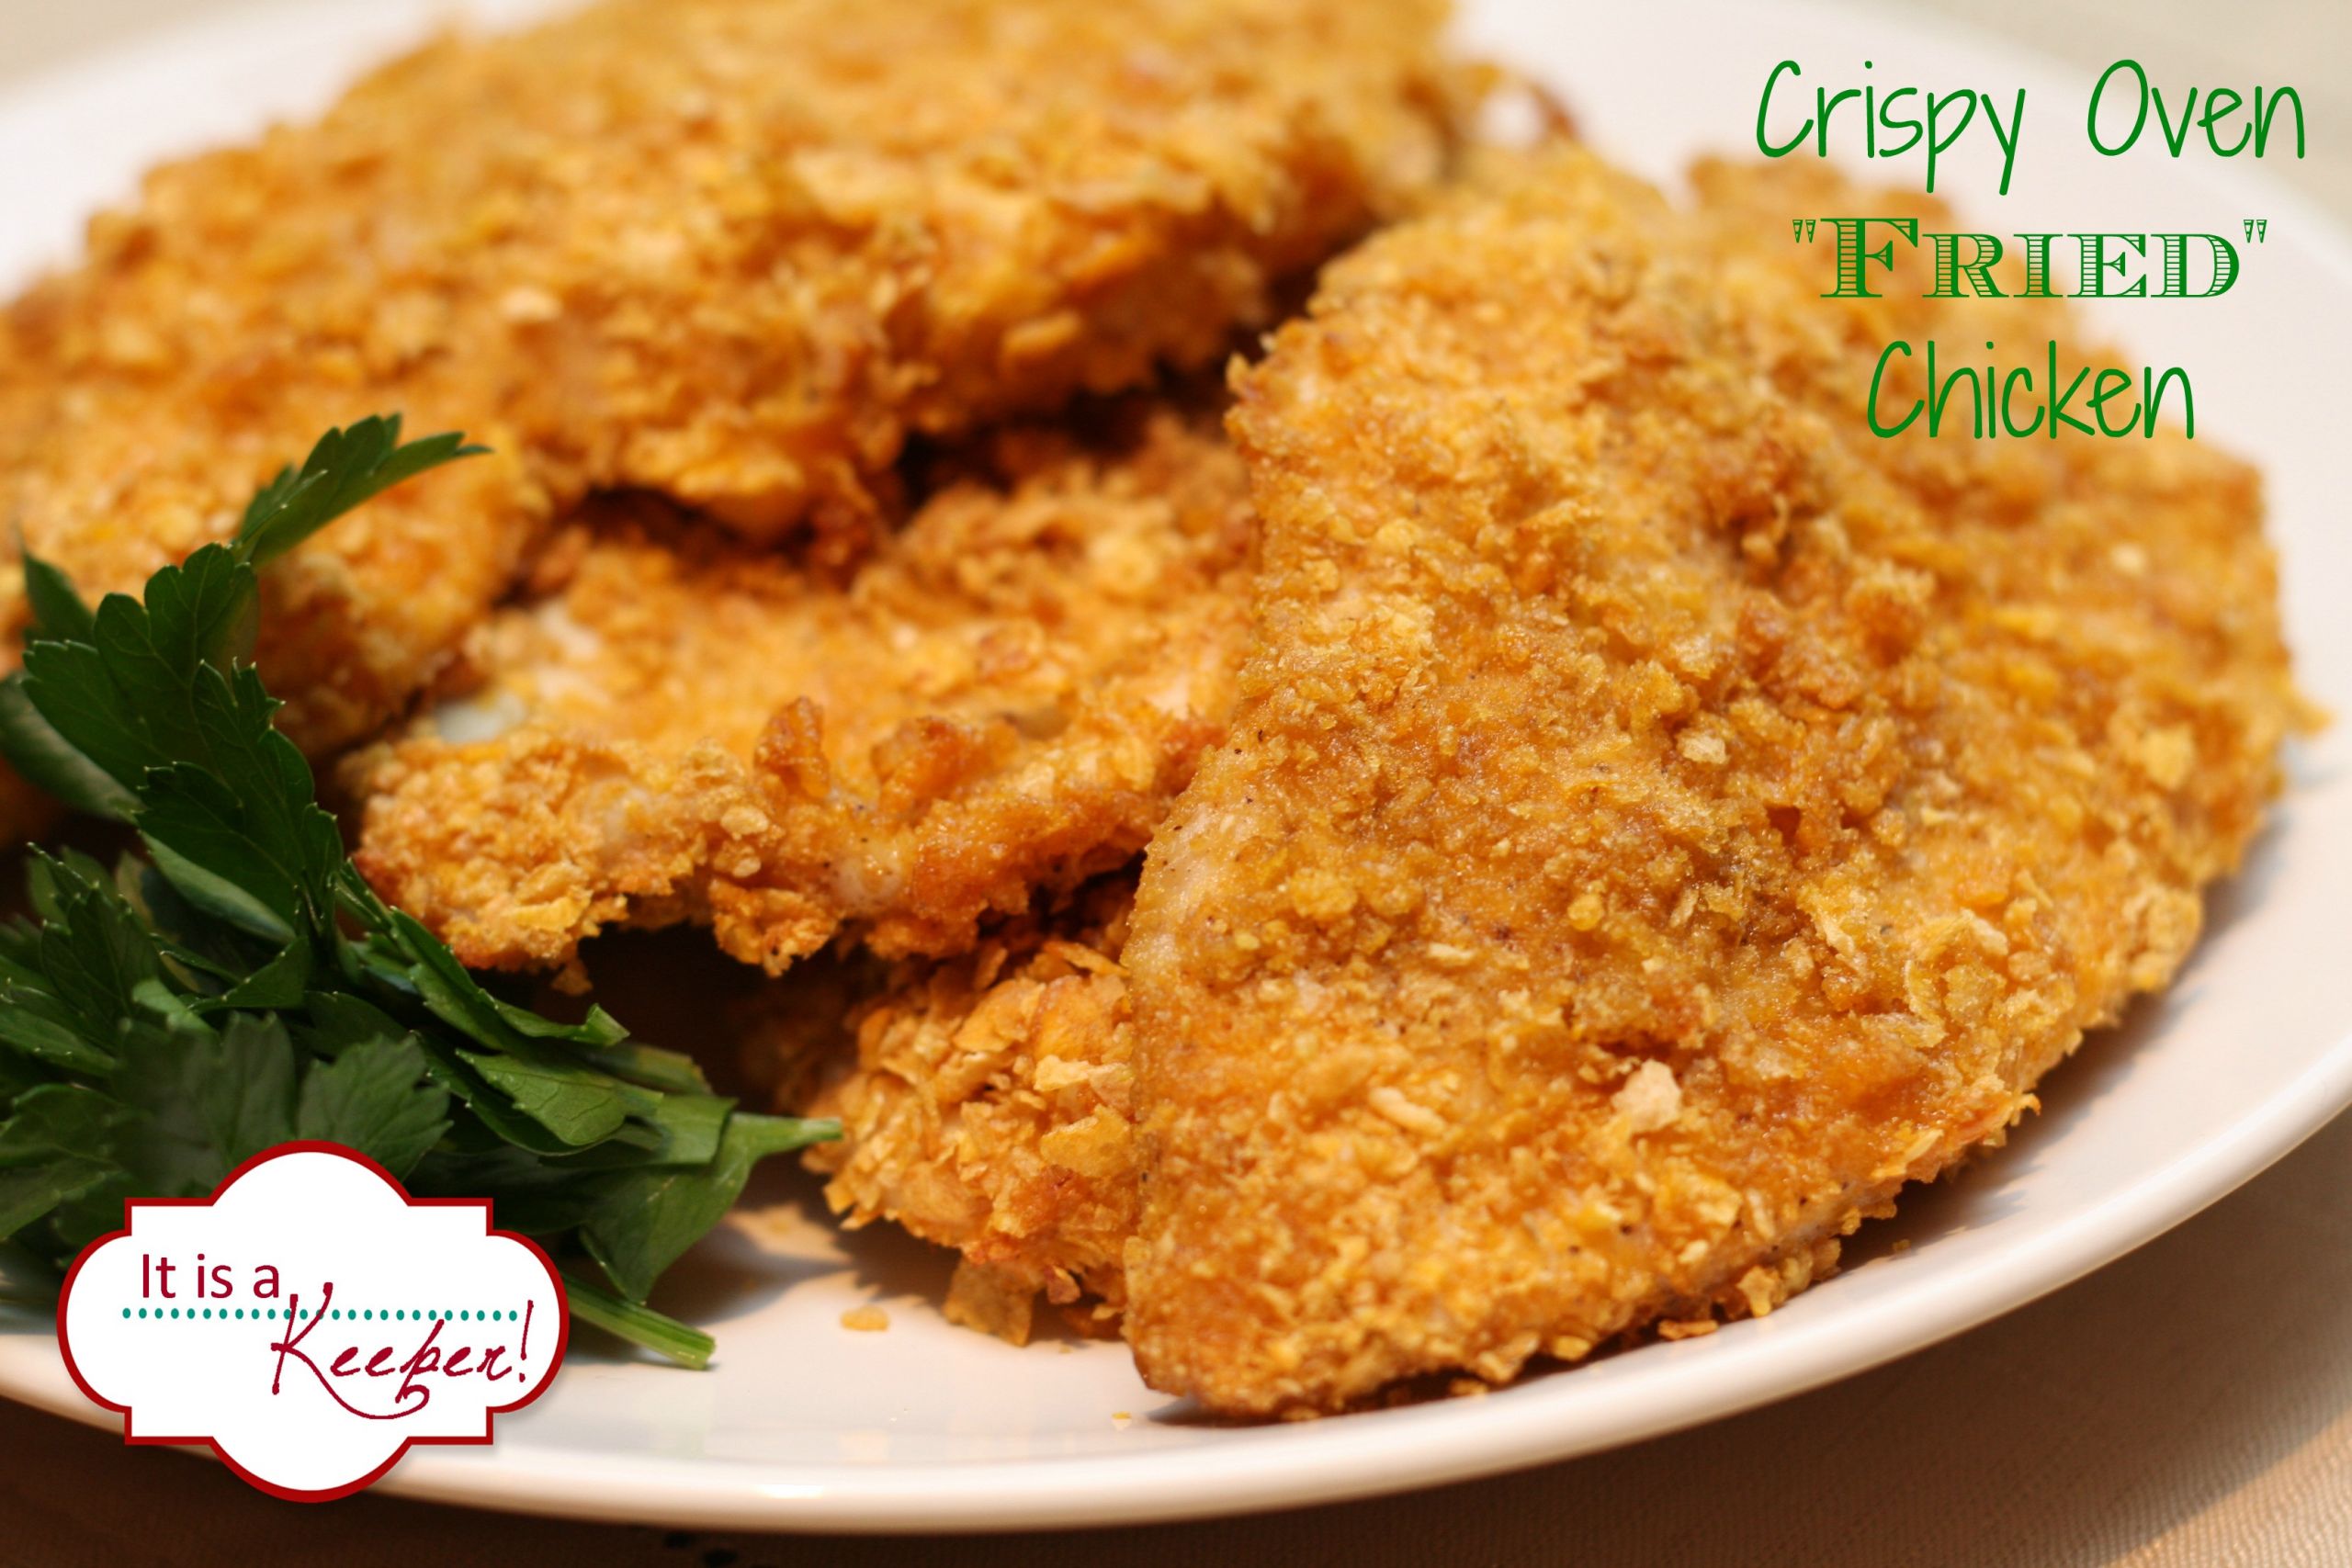 Oven Fried Chicken Recipes
 Crispy Oven Fried Chicken